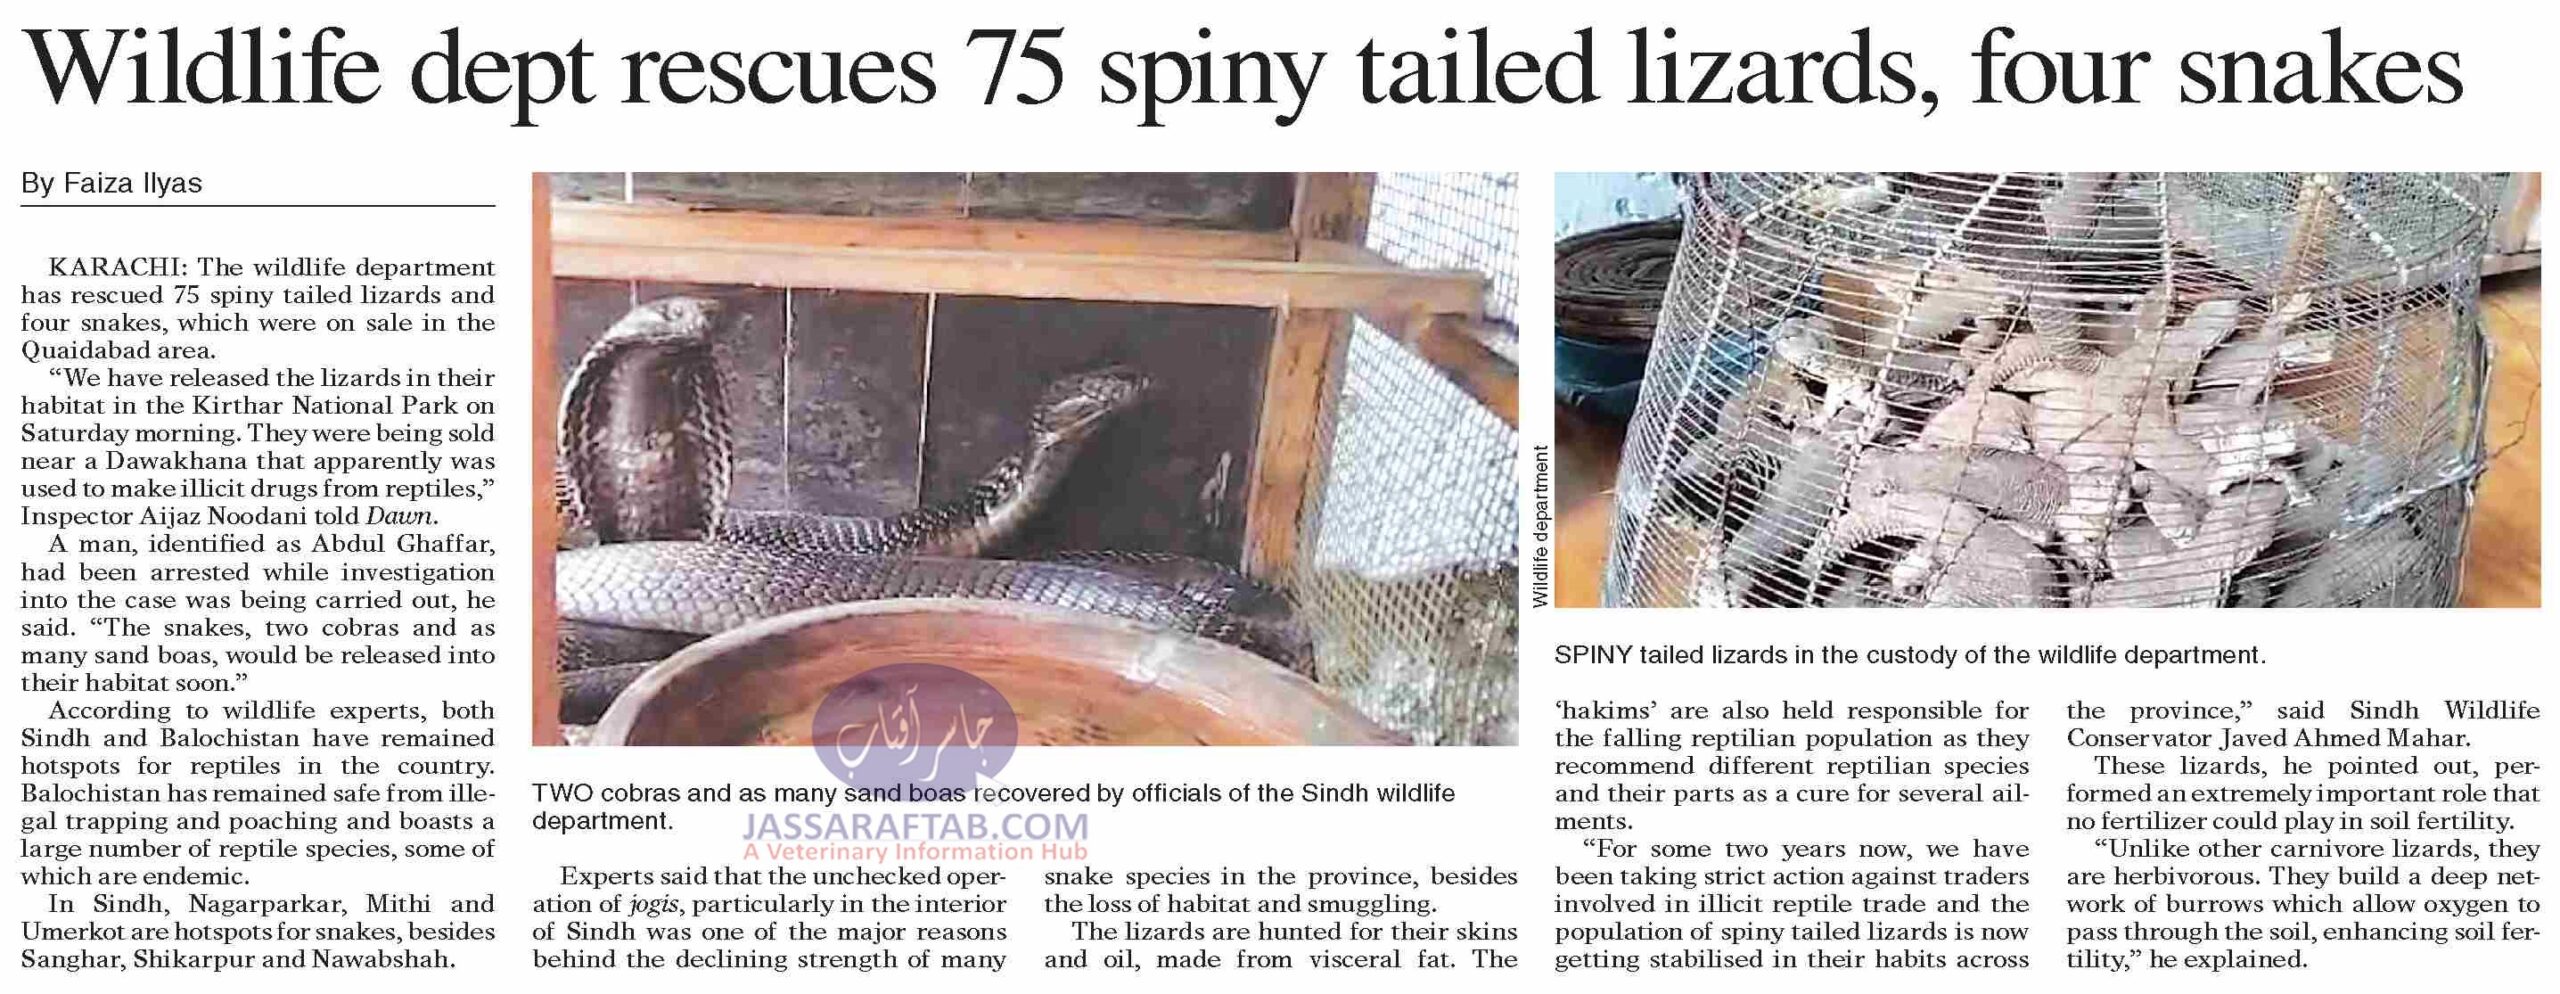 Wildlife dept rescues 75 spiny tailed lizards & four snakes